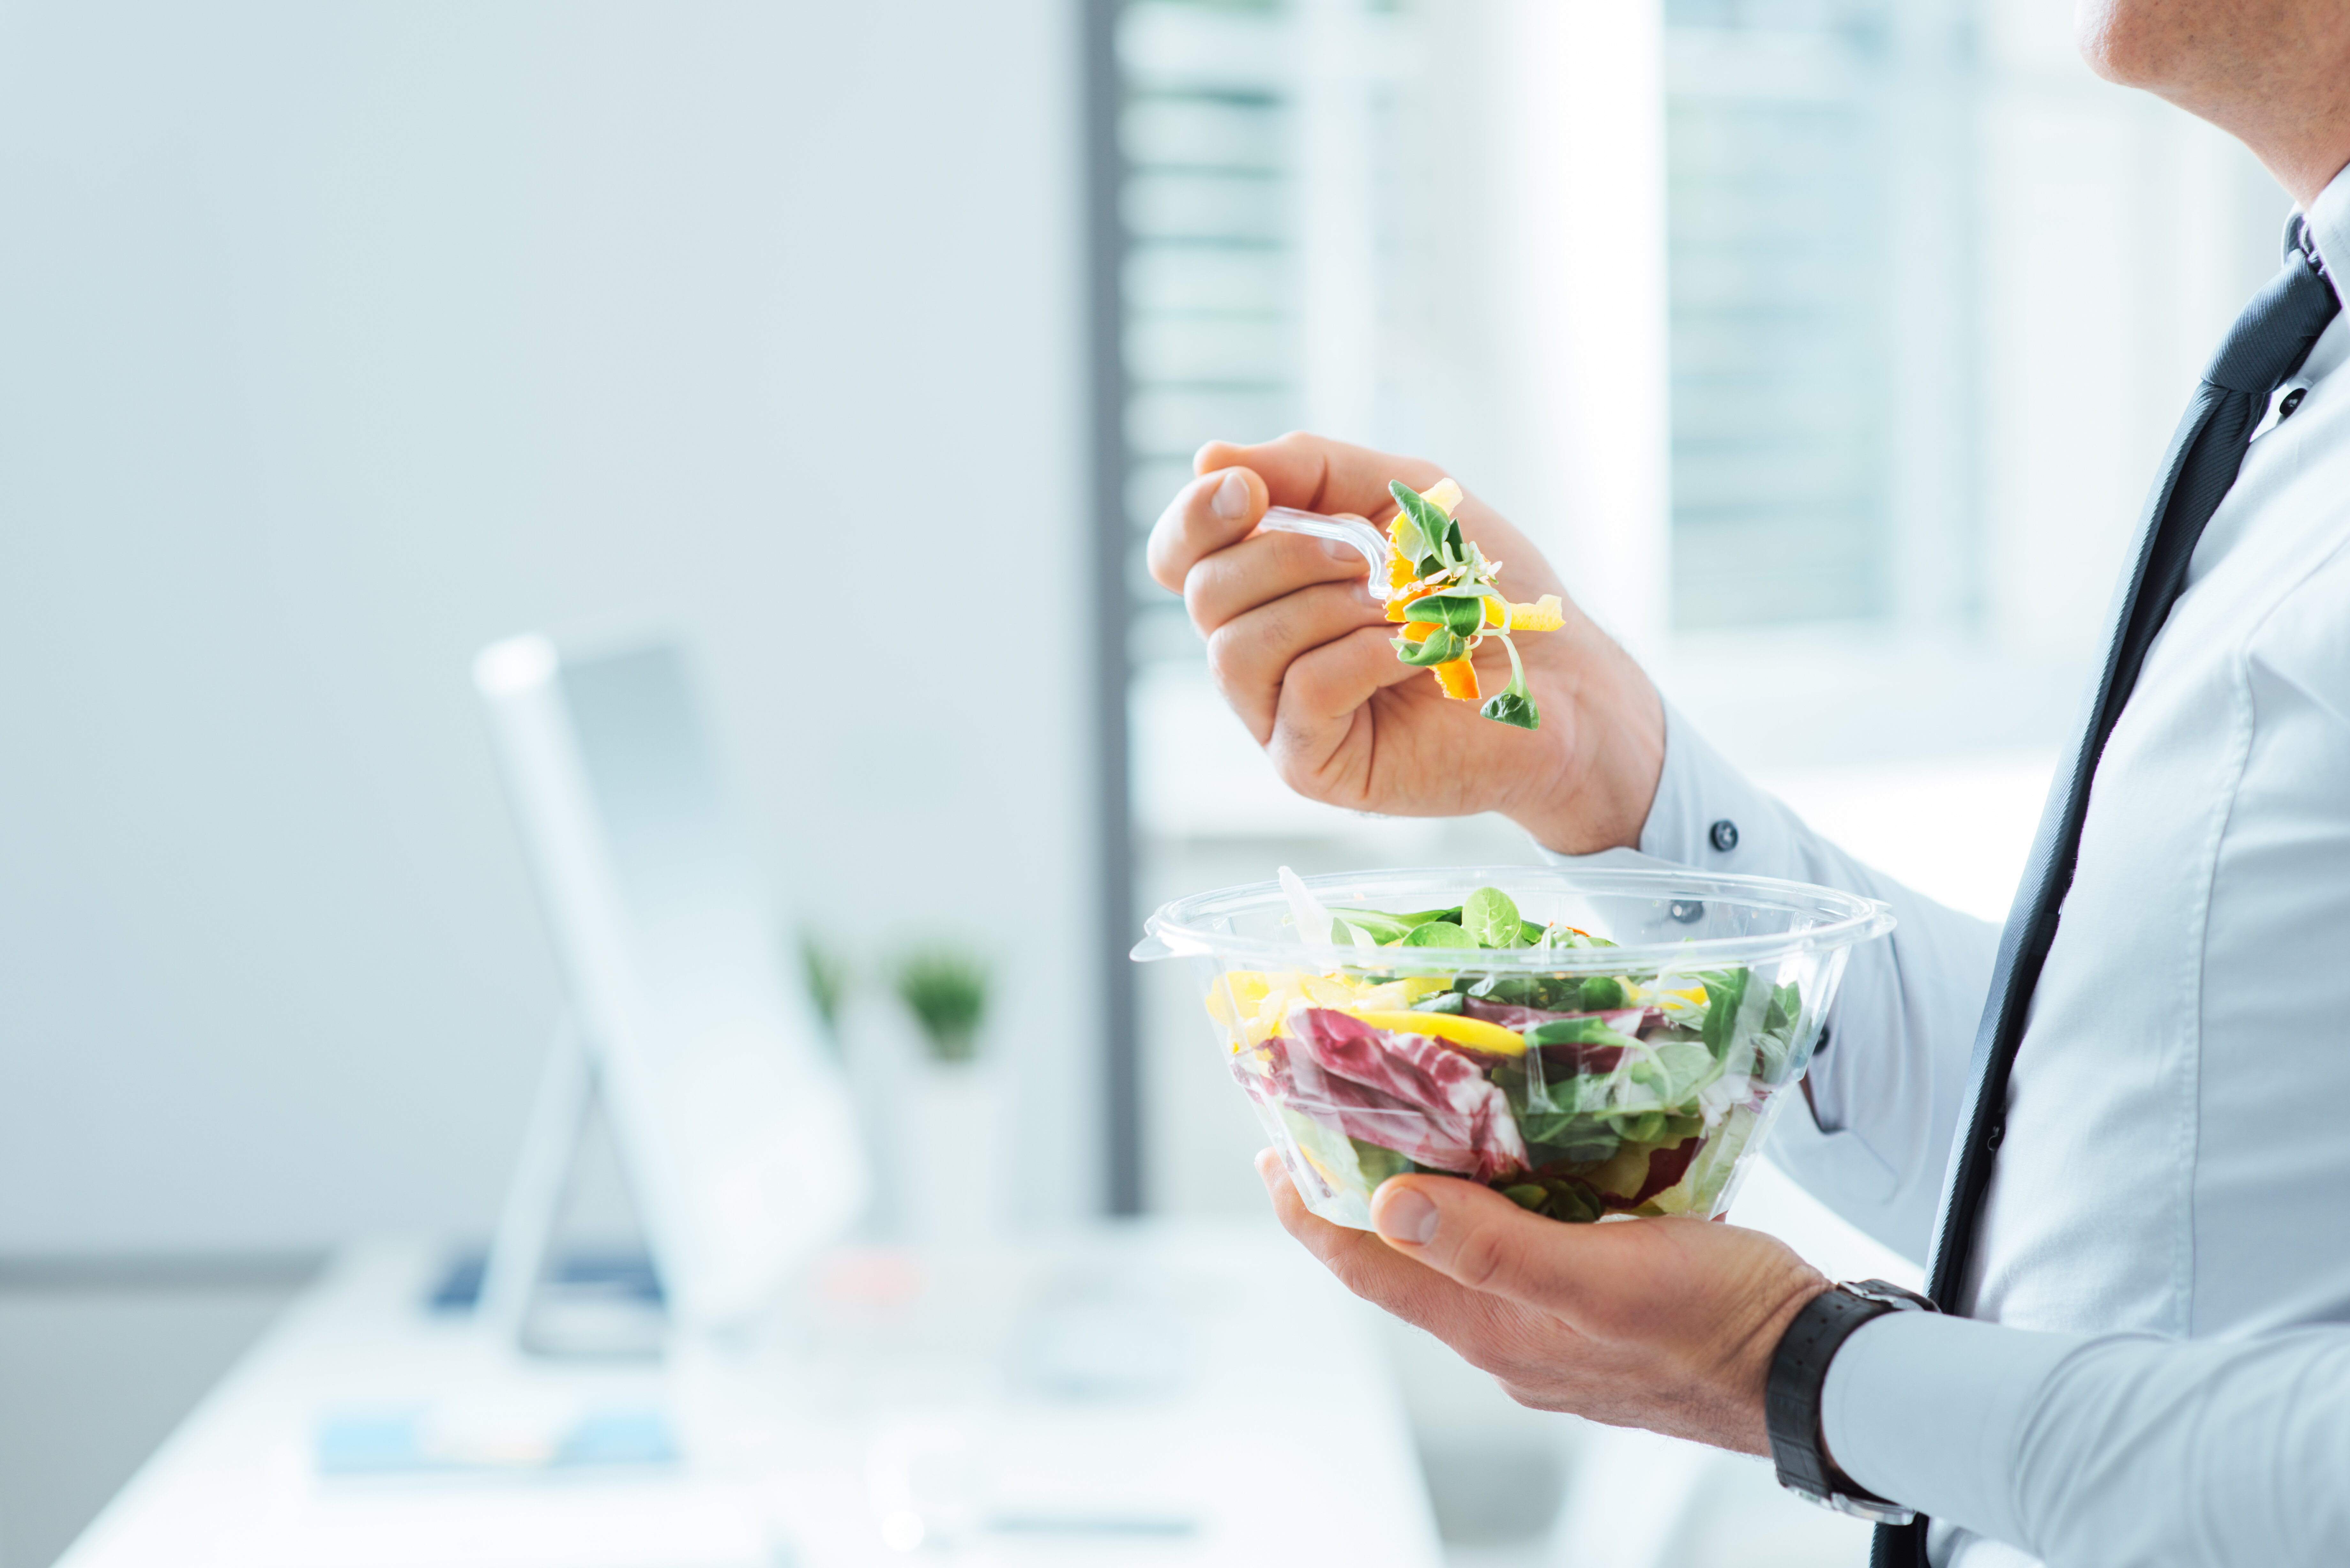 Office caterers see rise in spend from flexible workers